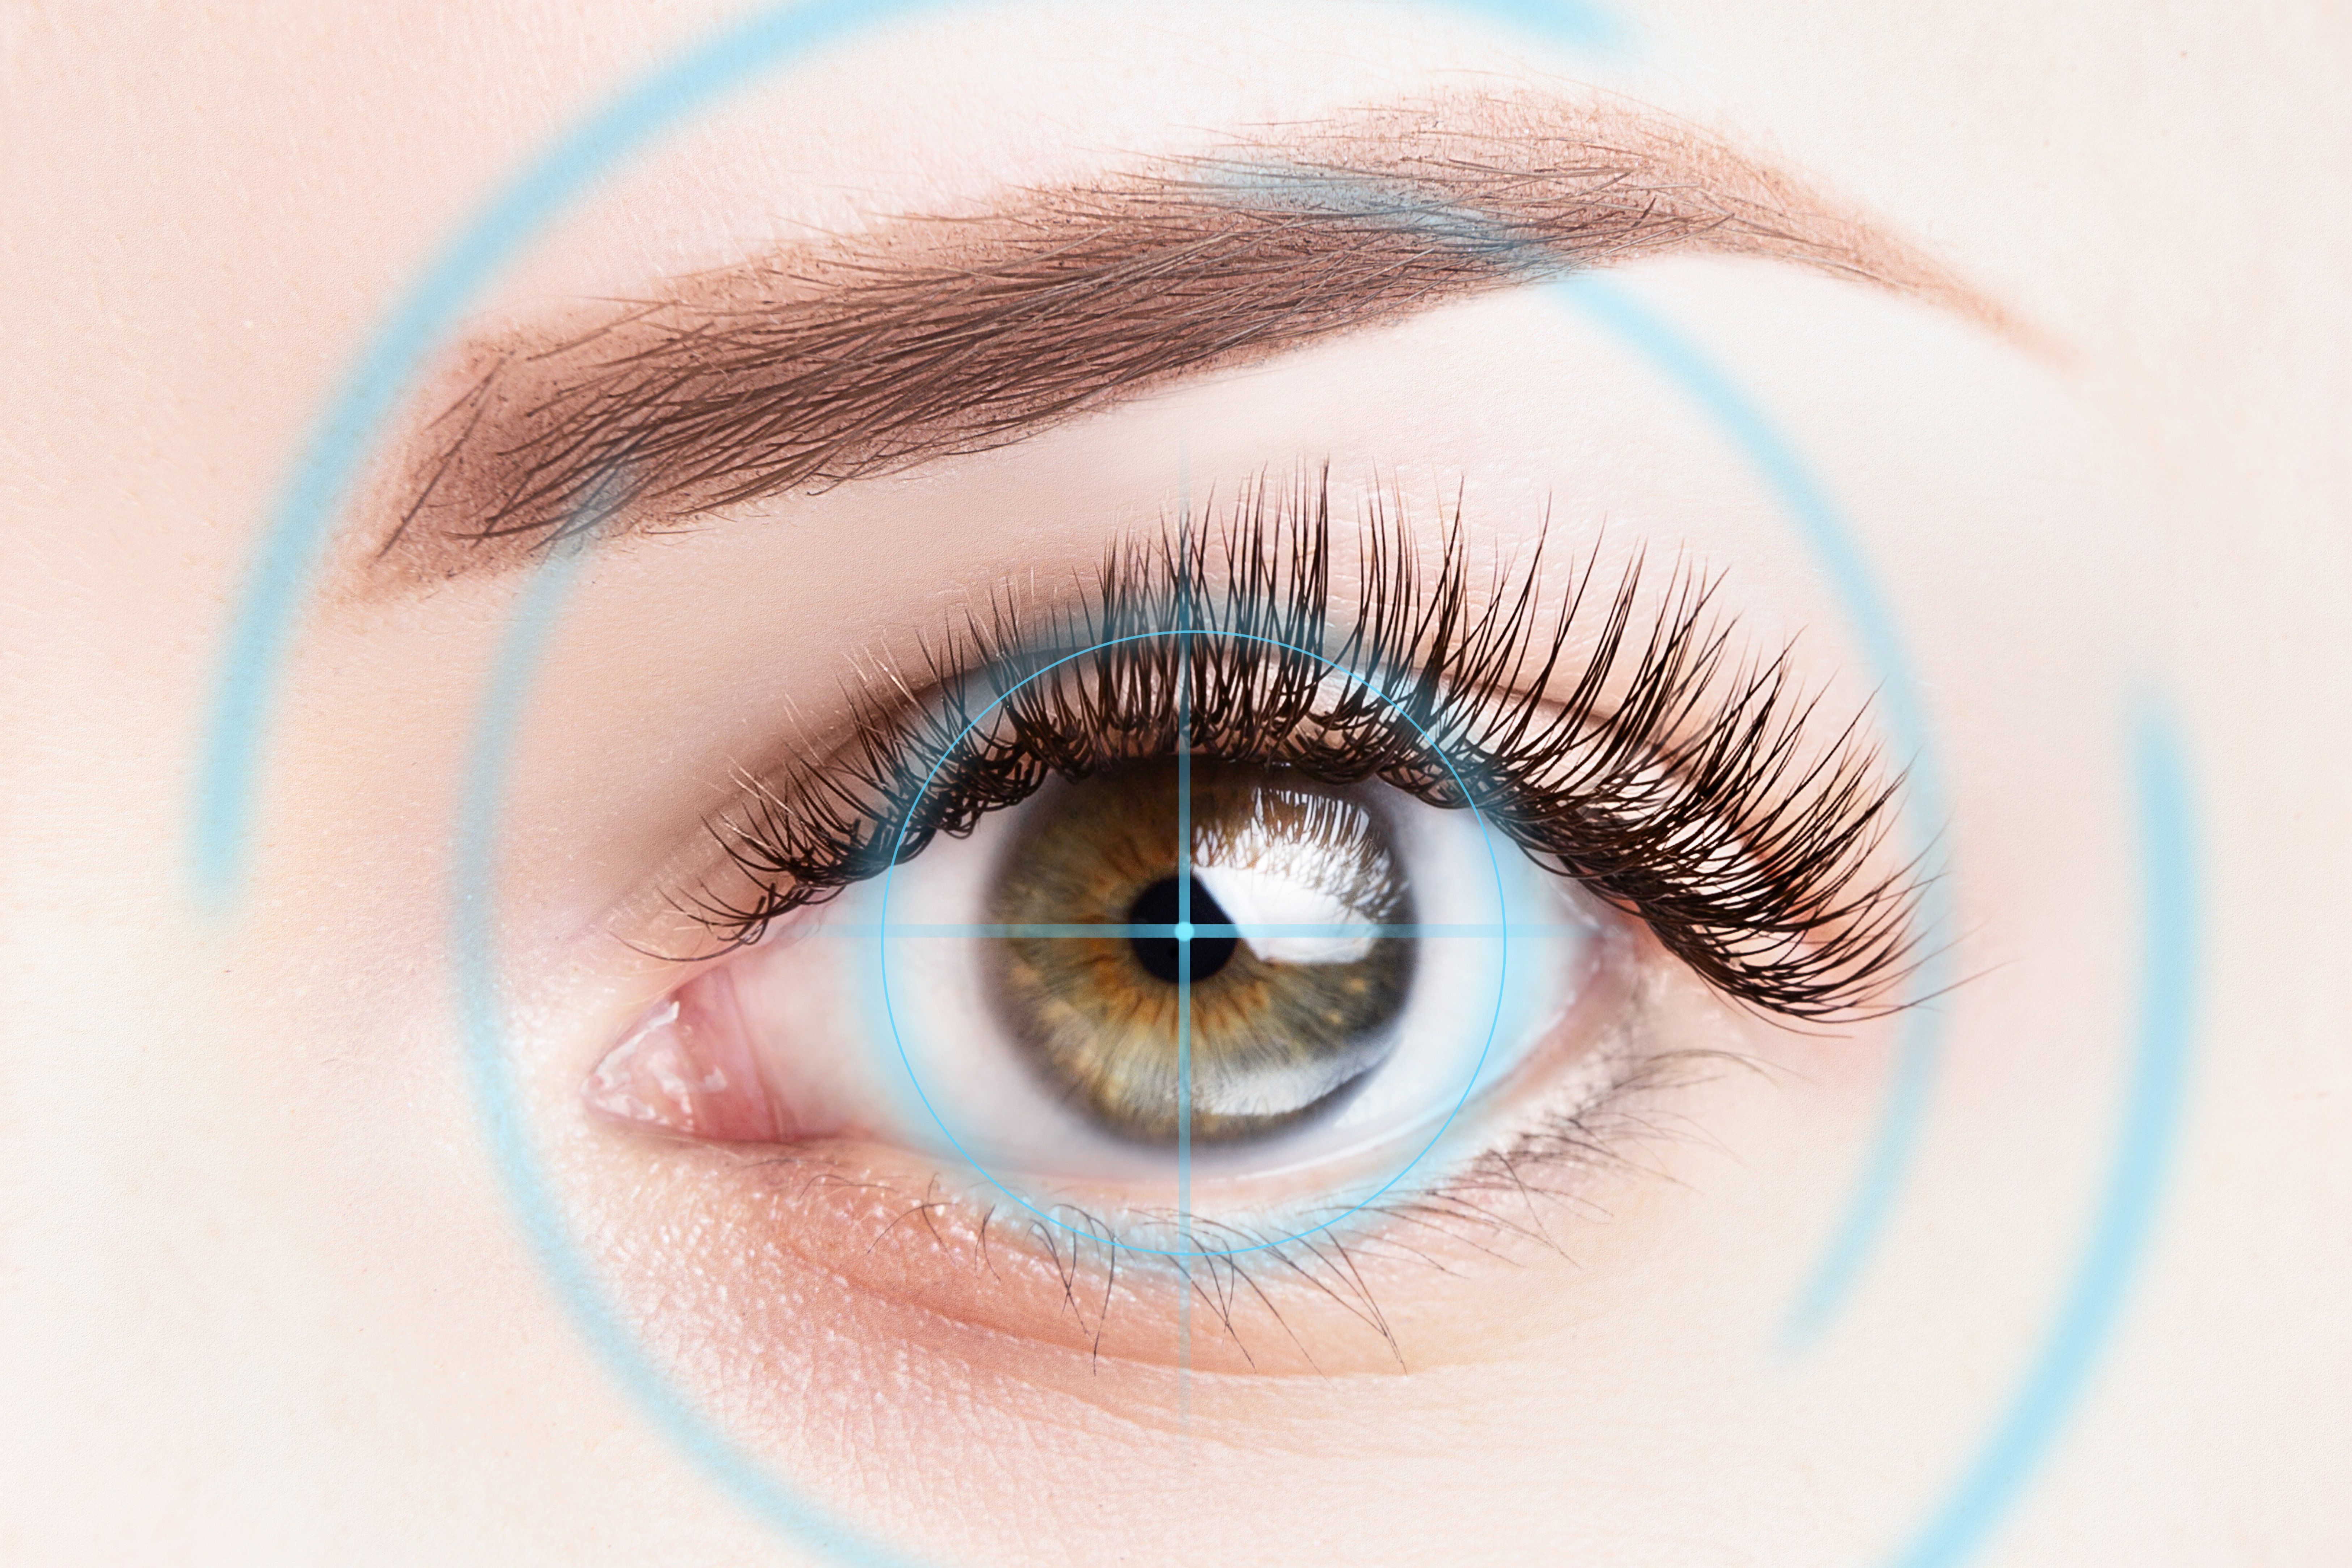 LASIK vs. PRK: What Is the Difference?